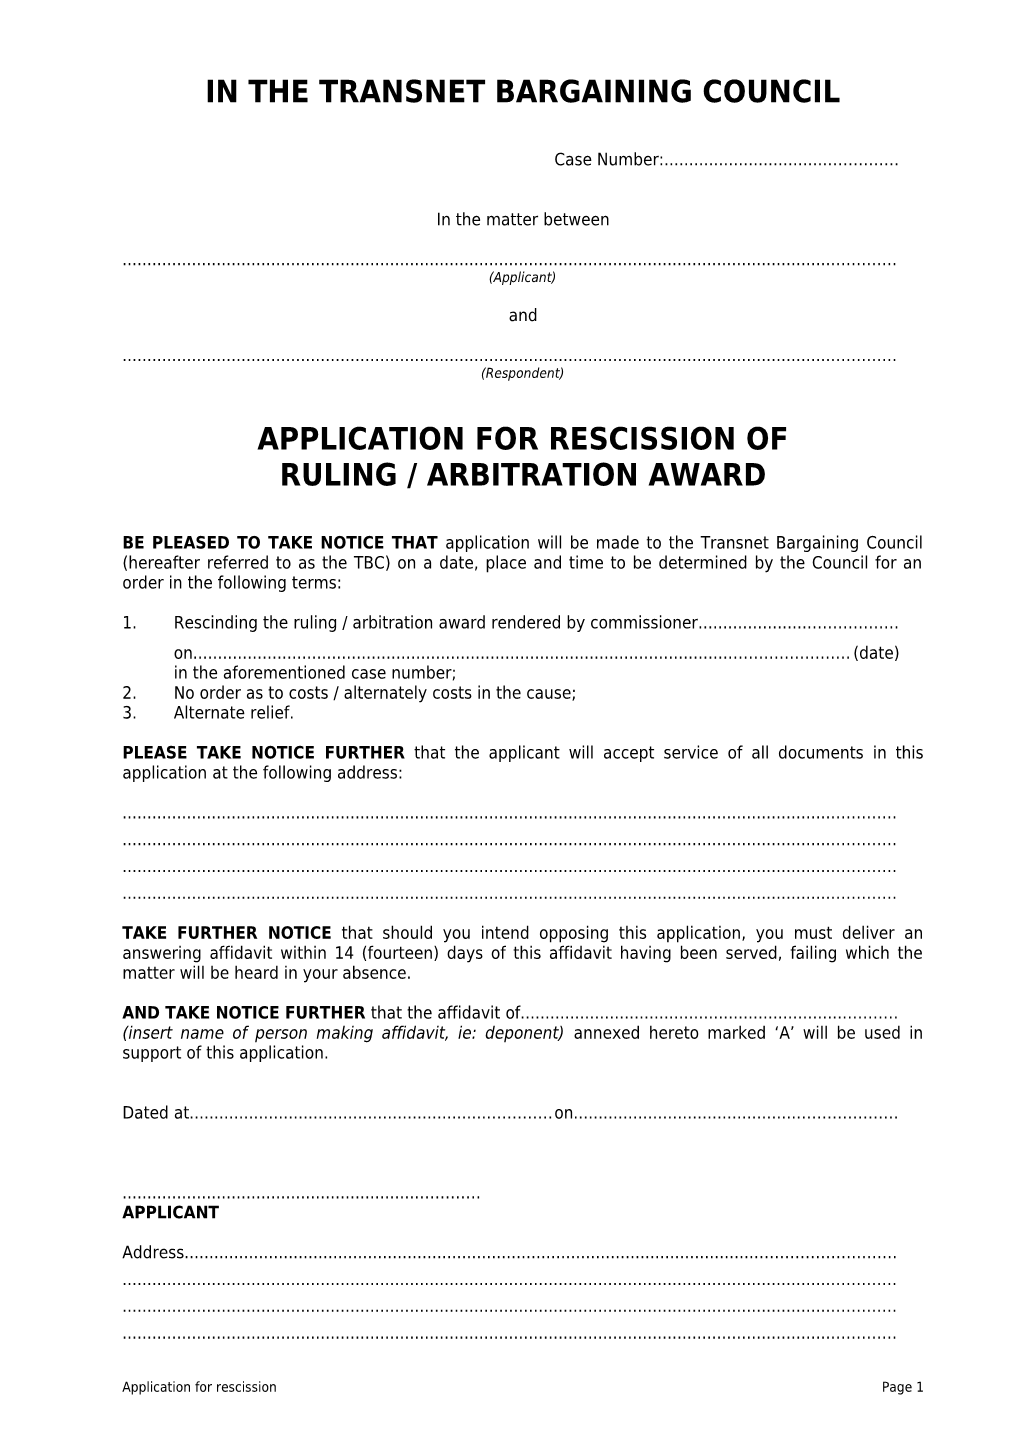 Application for Condonation in Respect of Unfair Dismissal Dispute